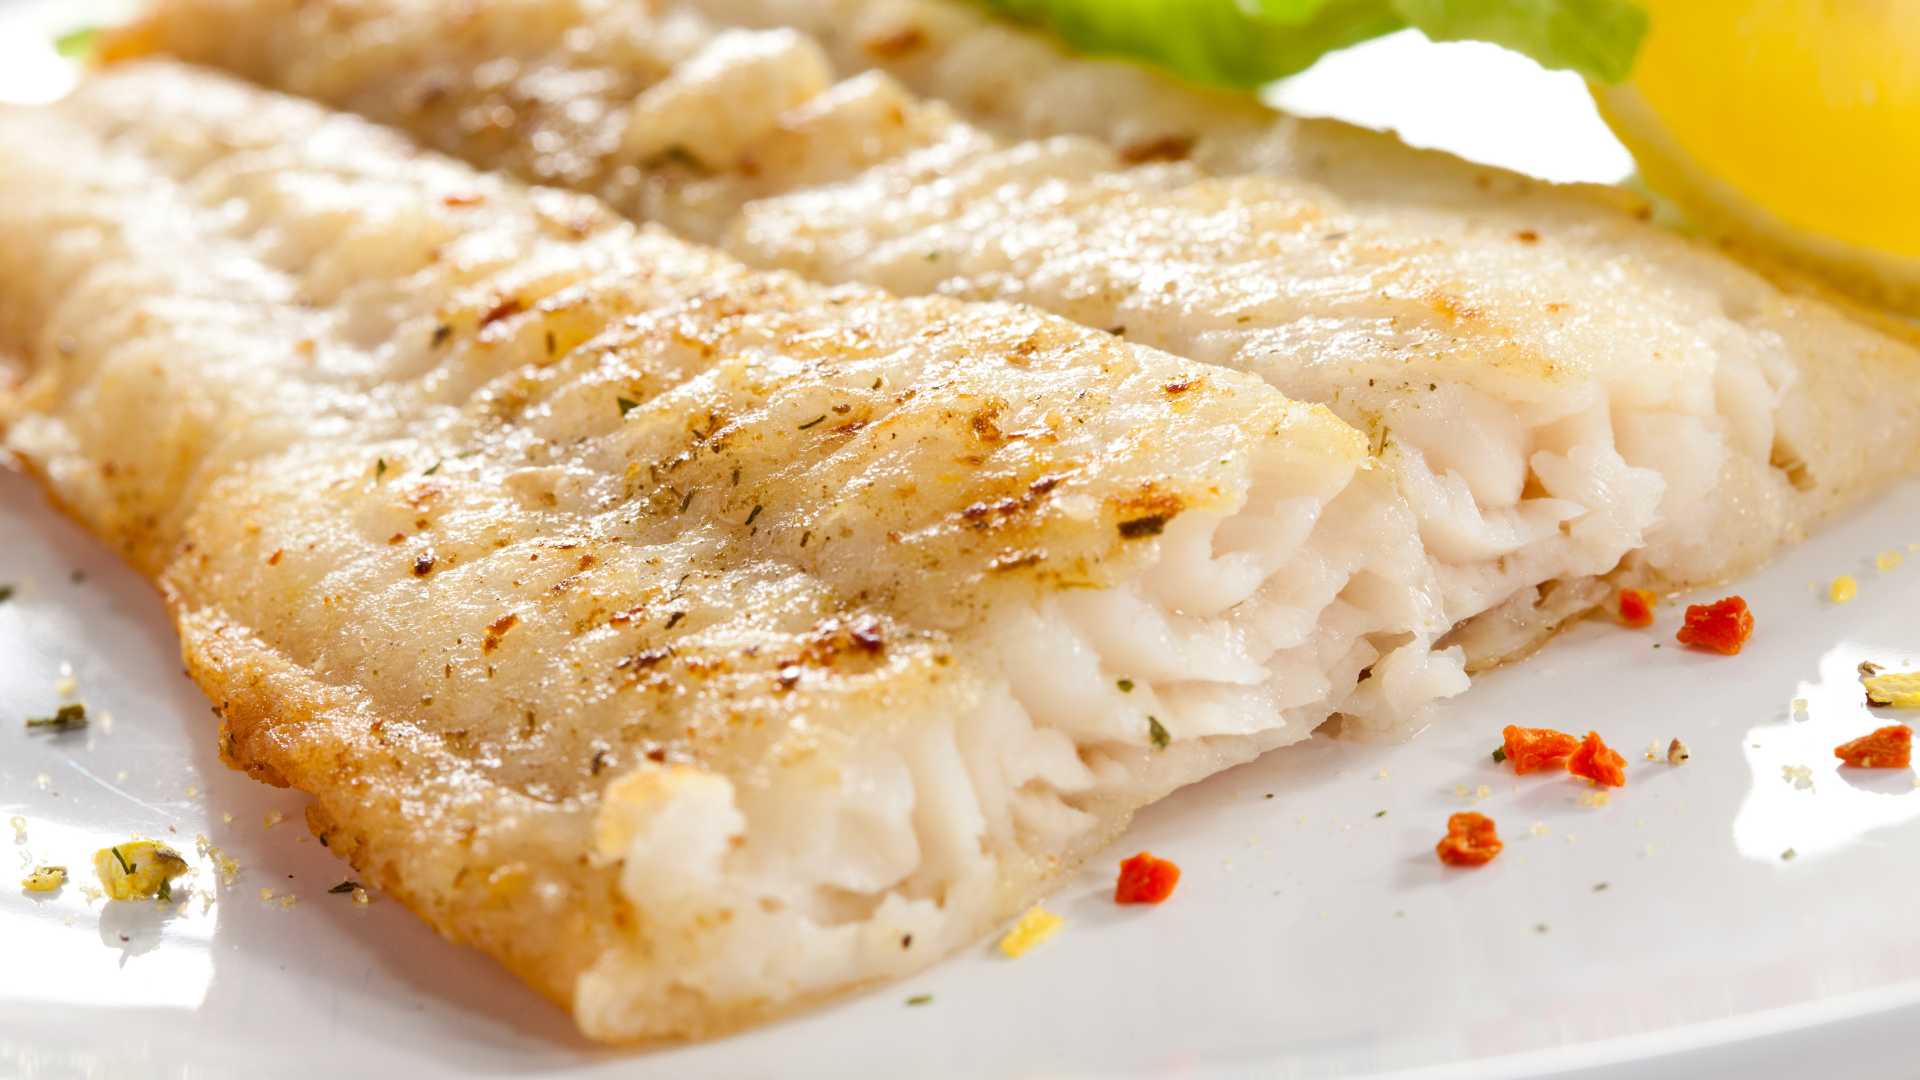 Best Side Dishes for Cod